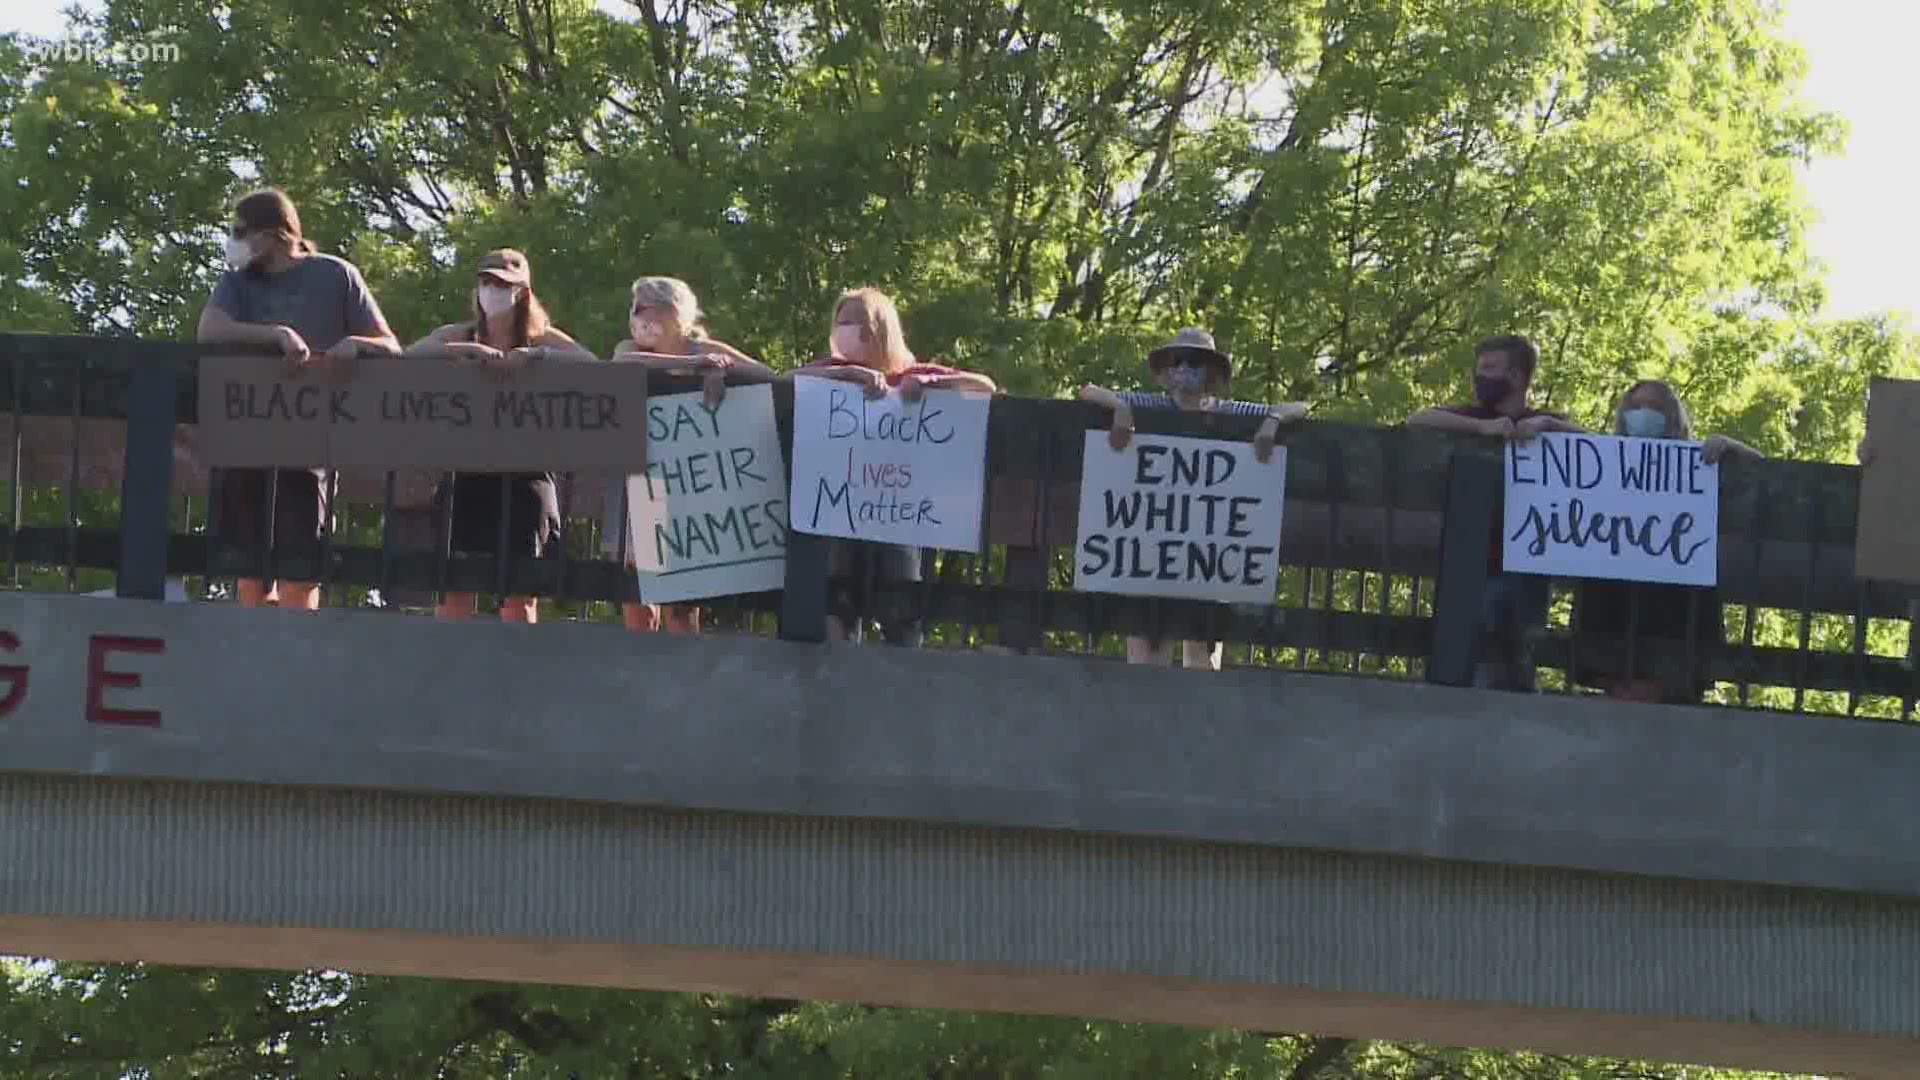 Nearly 900 people stood today on both sides of Alexander Parkway in Maryville silently and peacefully.